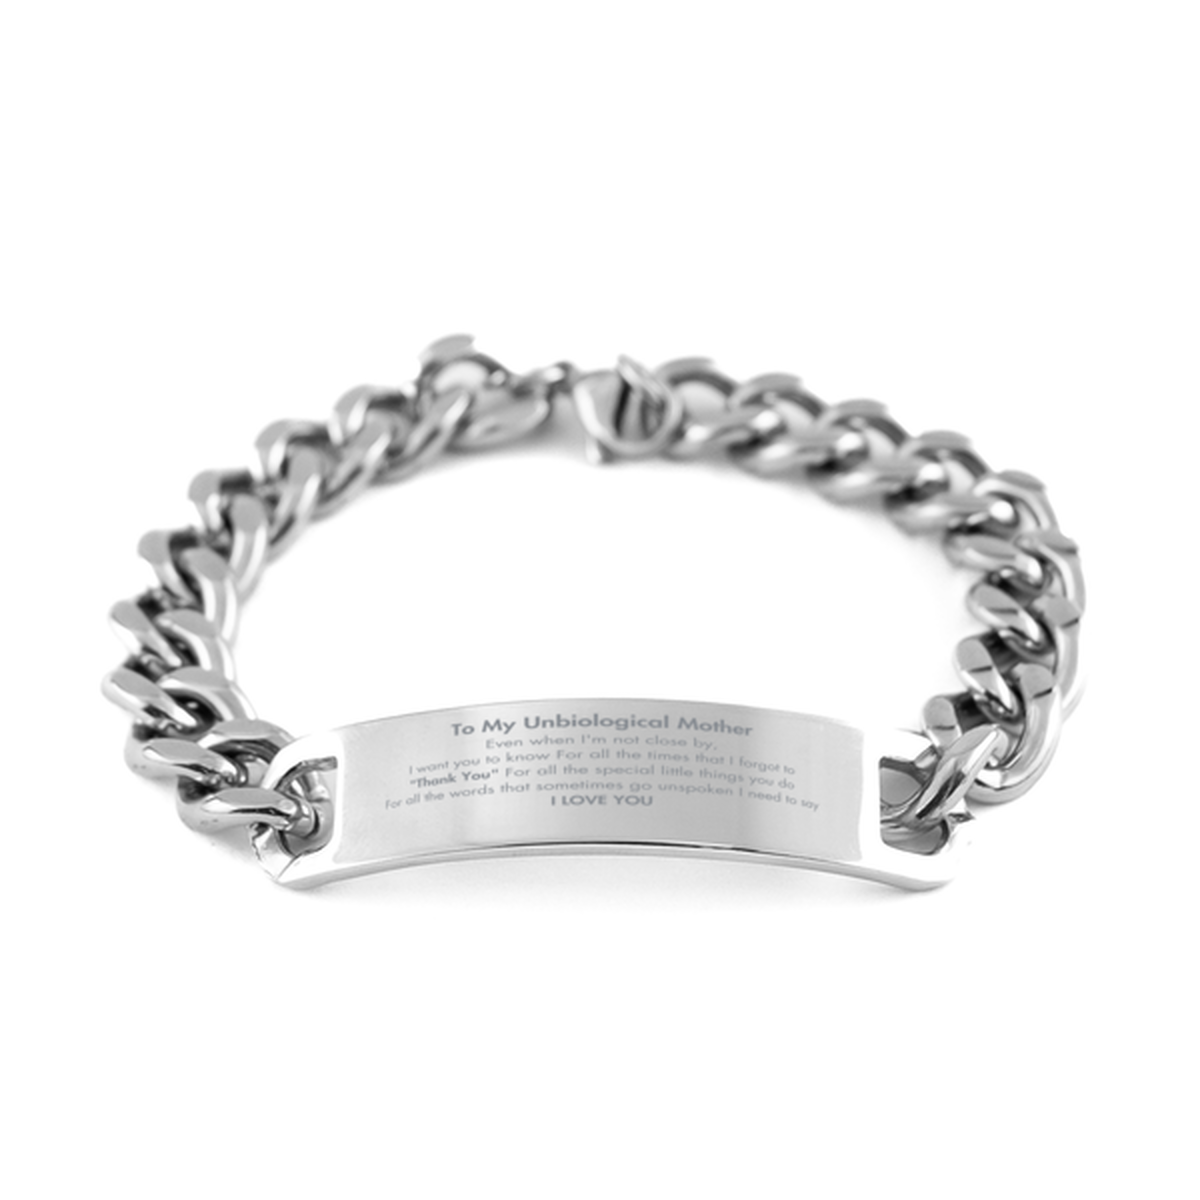 Thank You Gifts for Unbiological Mother, Keepsake Cuban Chain Stainless Steel Bracelet Gifts for Unbiological Mother Birthday Mother's day Father's Day Unbiological Mother For all the words That sometimes go unspoken I need to say I LOVE YOU